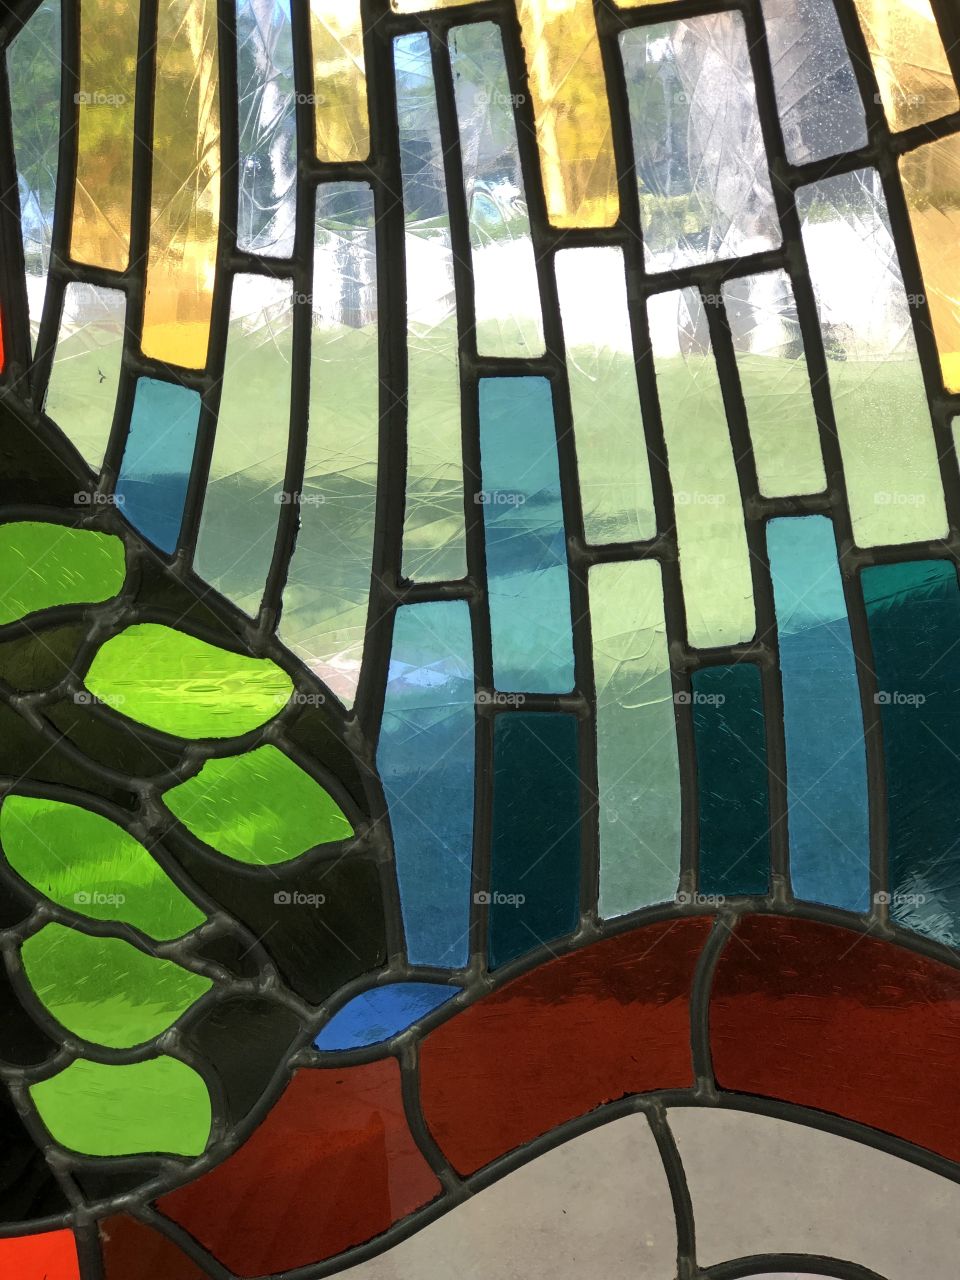 Stained glass is one of the most beautiful art forms in the world. Especially when it’s so full of color.